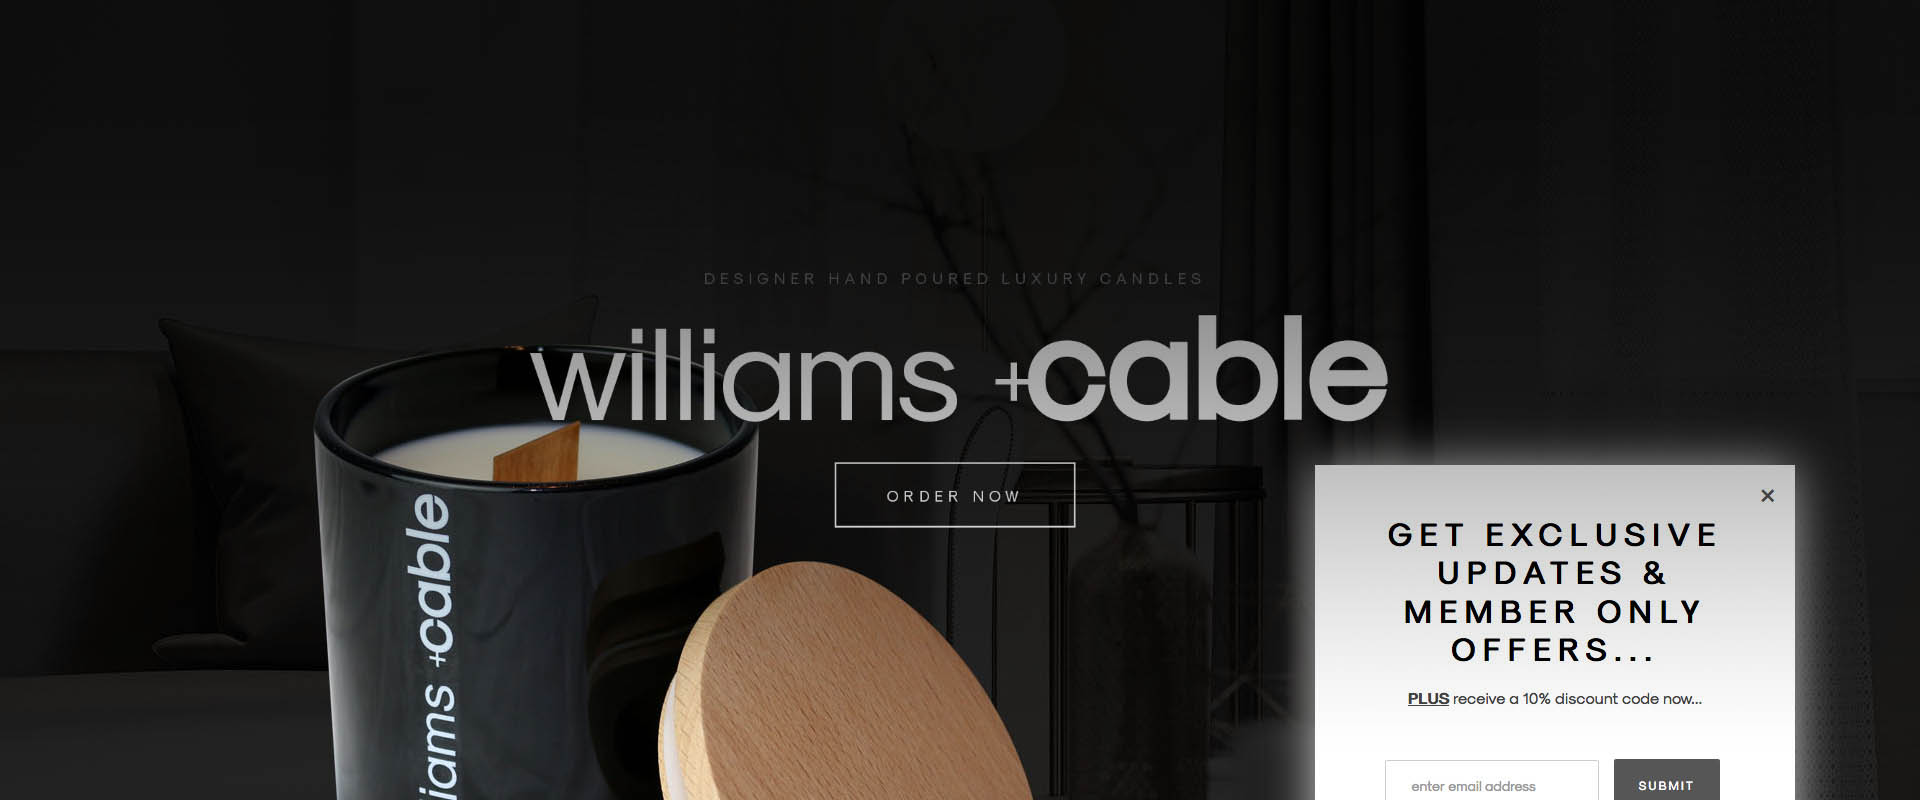 williams+Cable